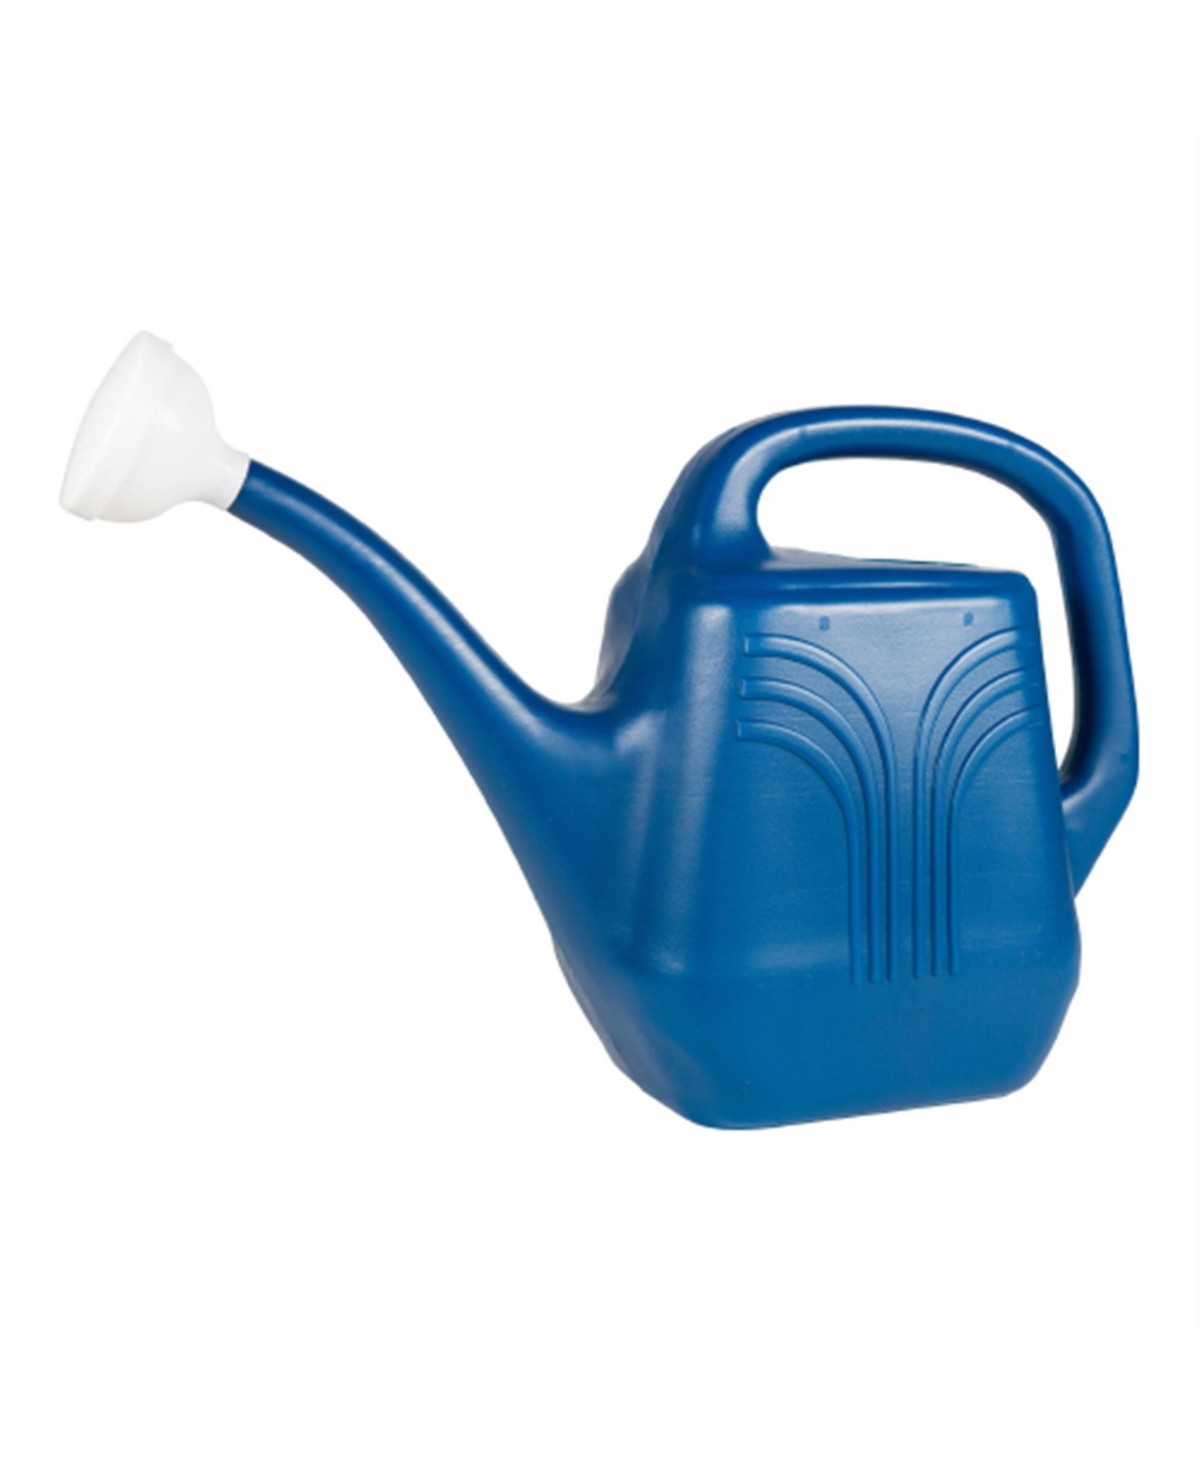 Classic Plastic Watering Can, Classic Blue, 2 Gallons - Blue